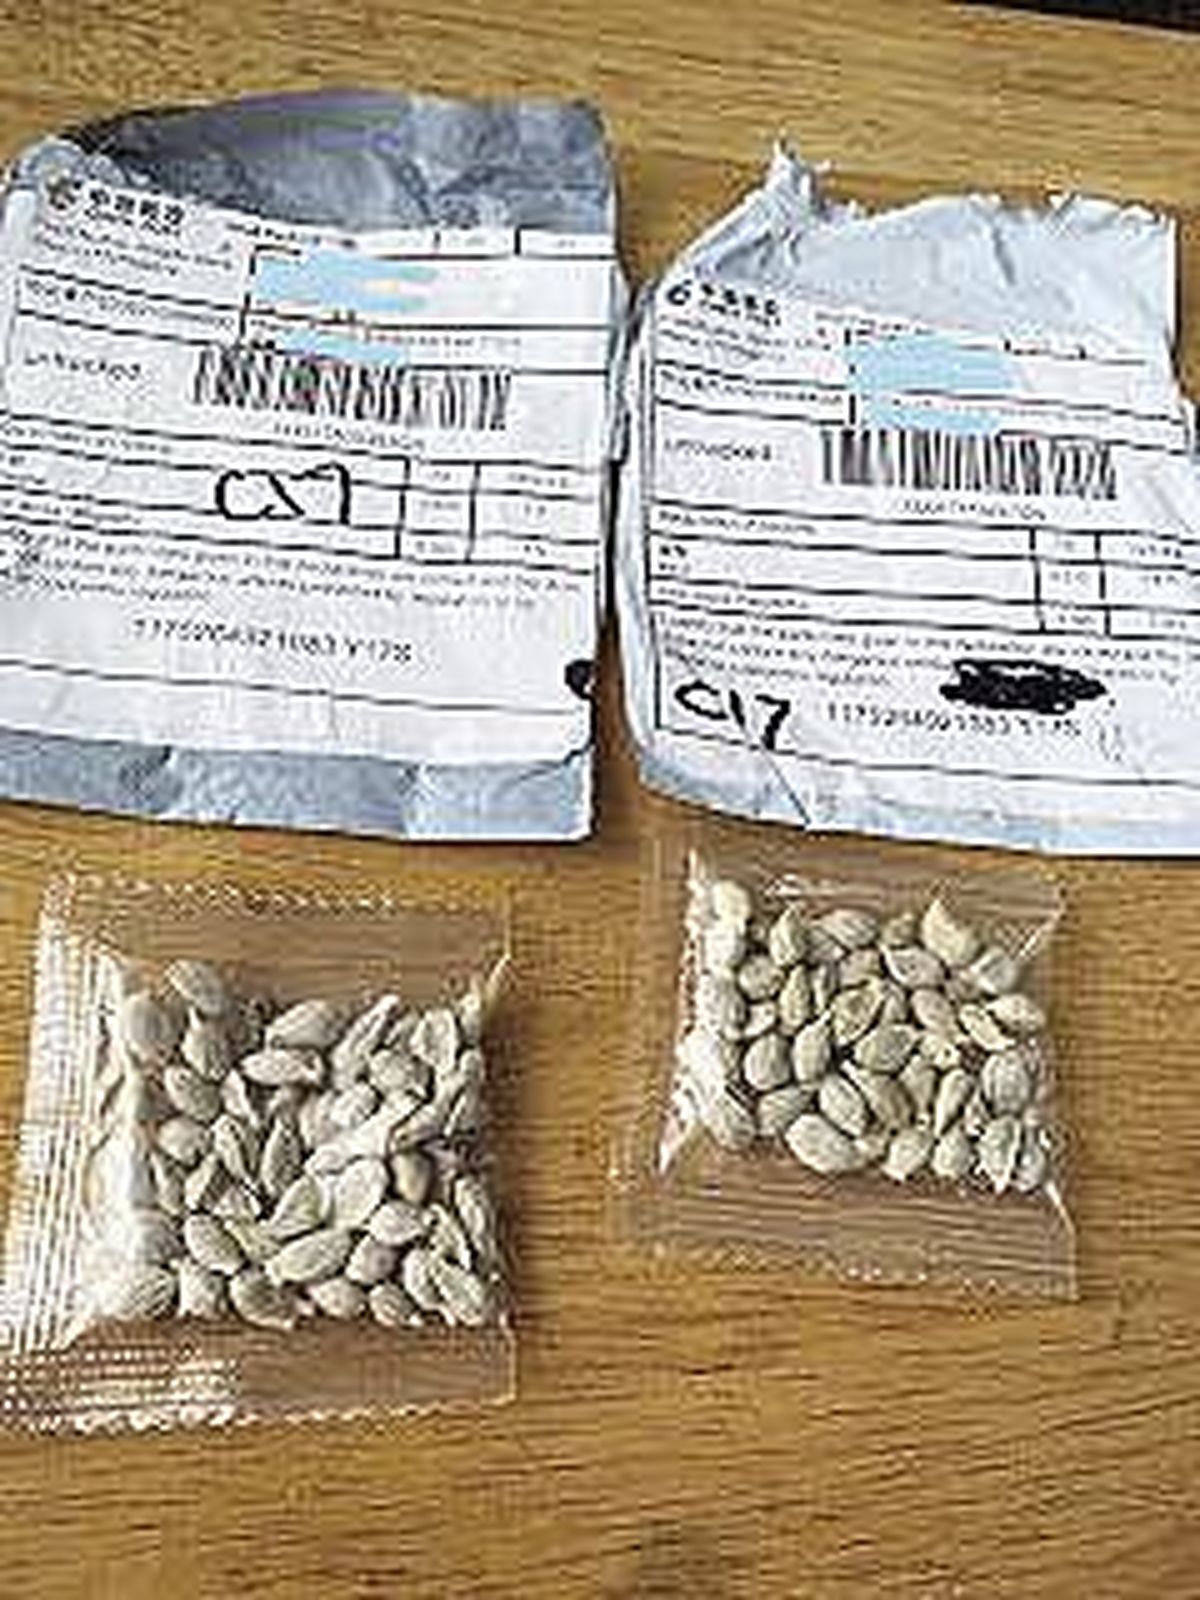 People who receive unsolicited seed packets are asked to mail them to the USDA Animal and Plant Health Inspection Service.  (USDA)